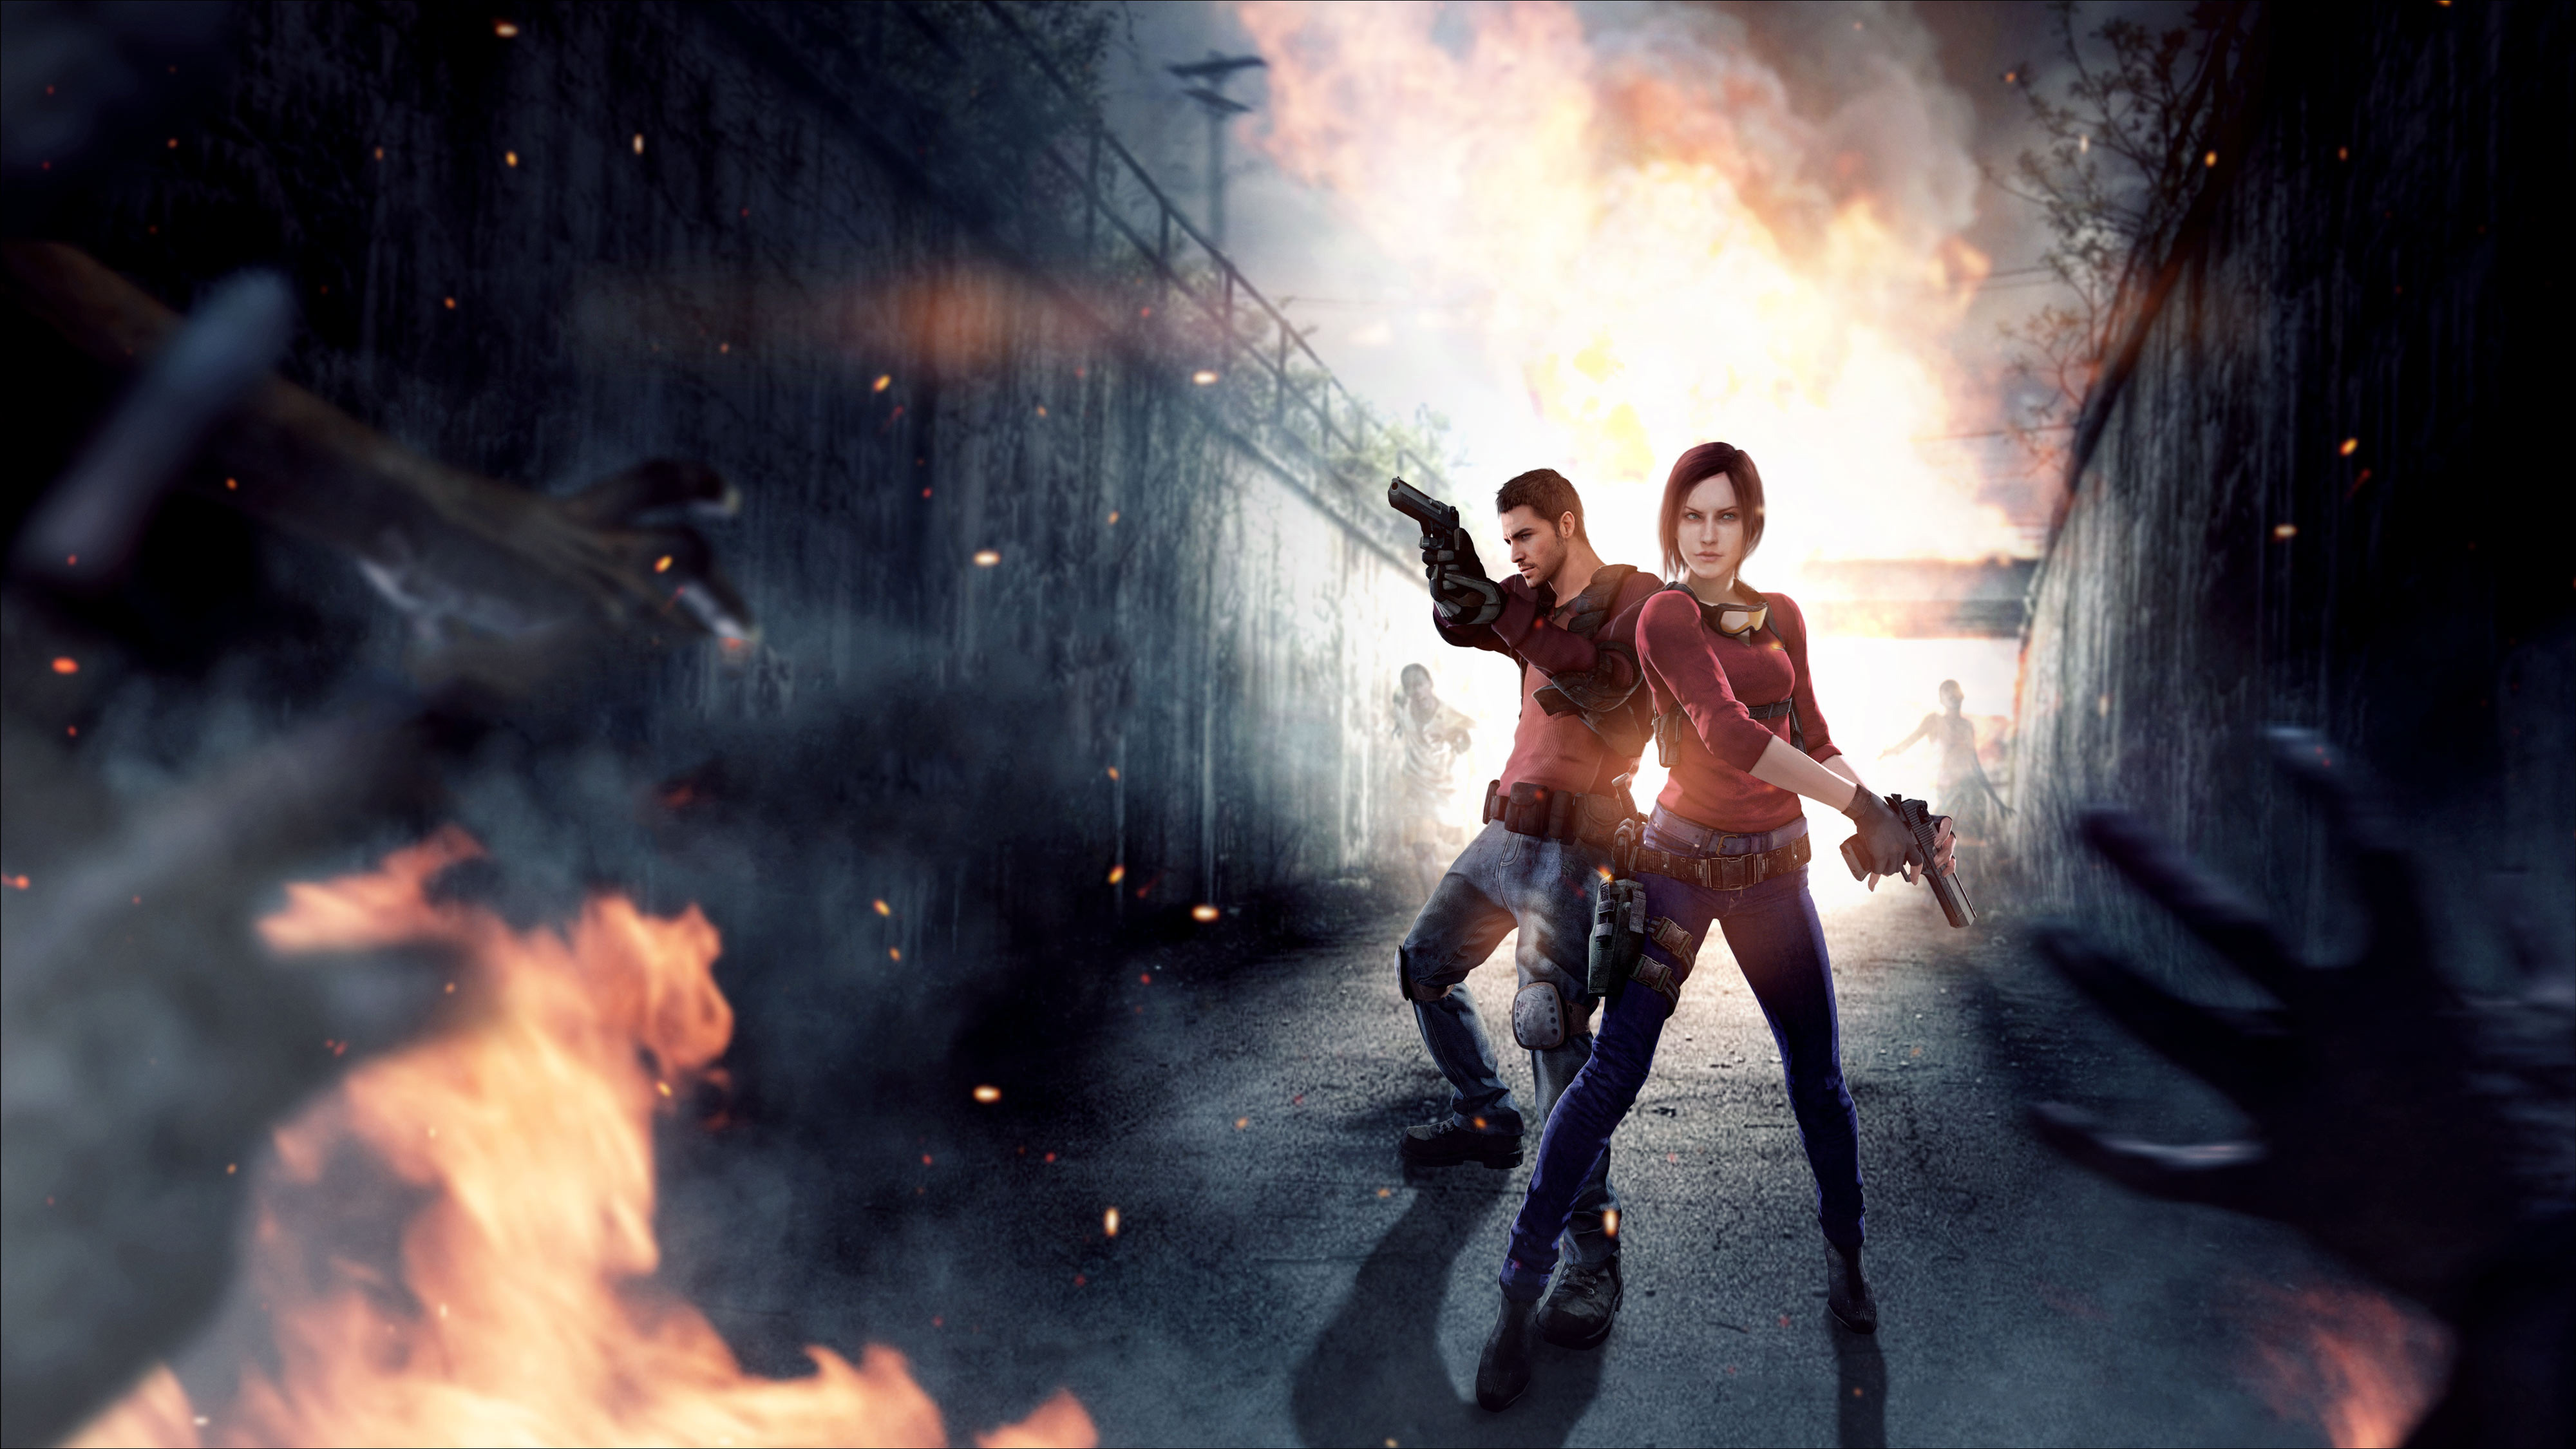 Resident Evil Claire Redfield Chris Redfield 4k Hd Games 4k